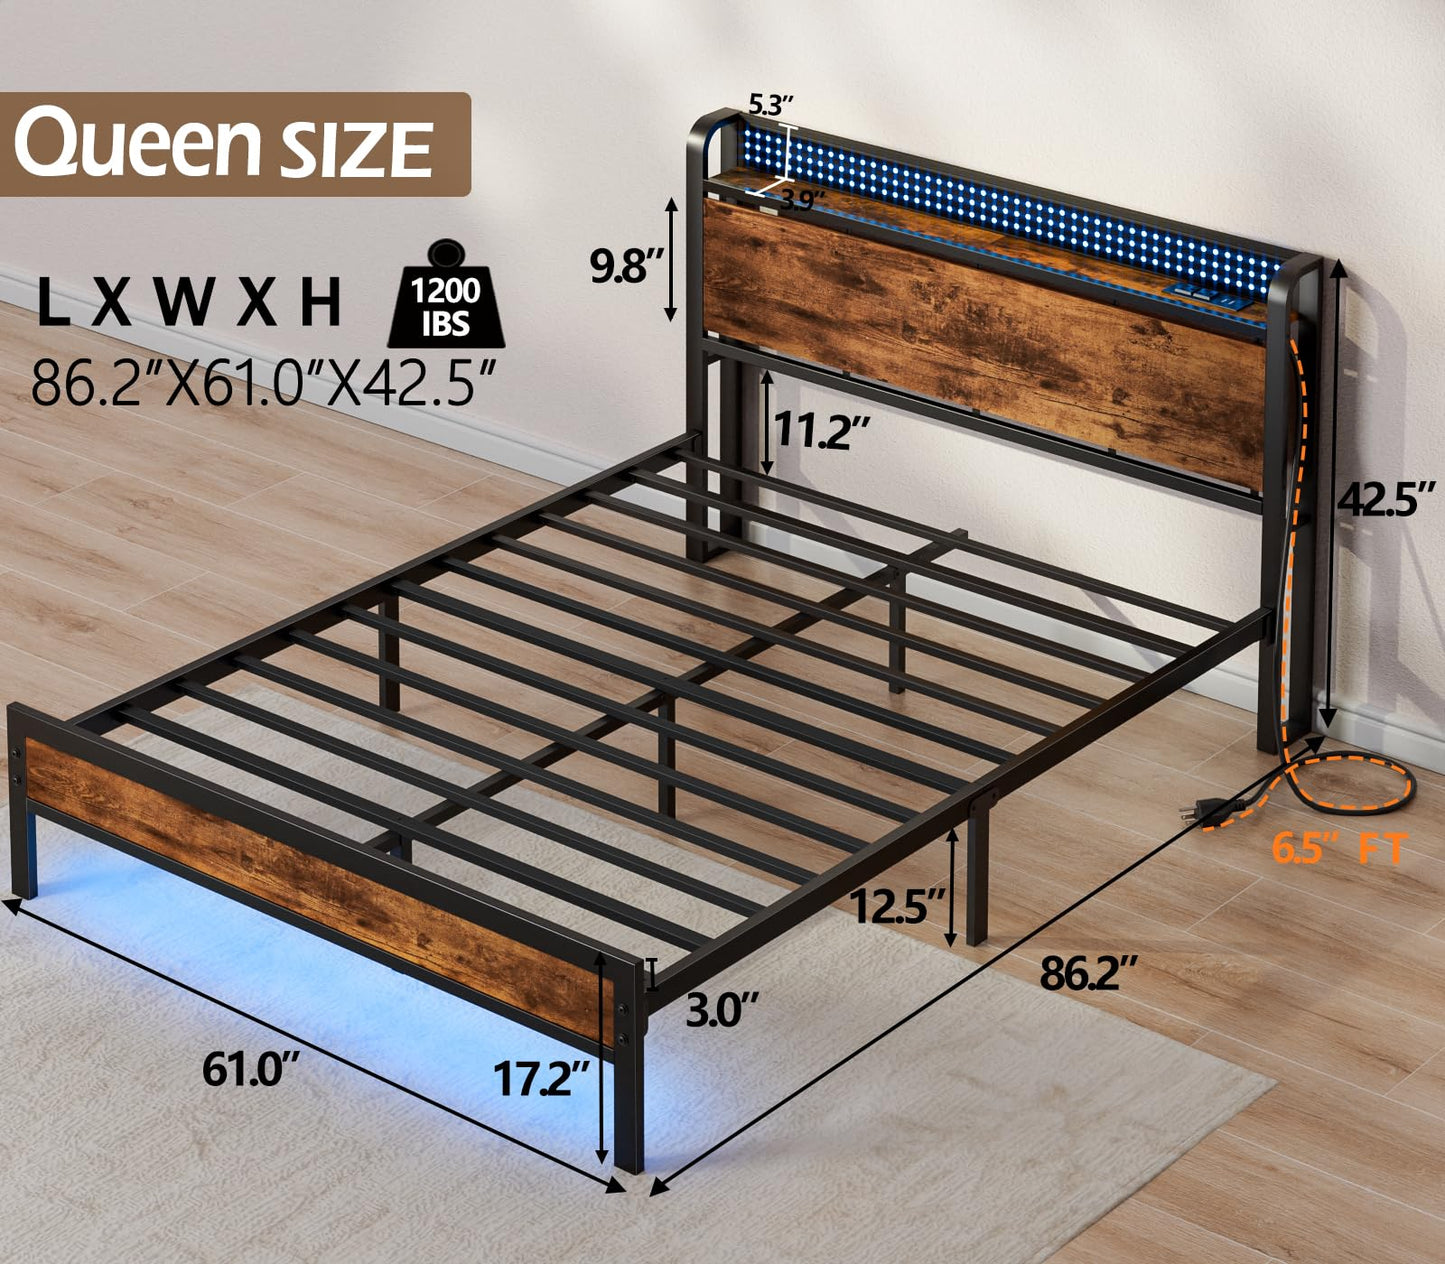 Furnulem Platform Queen Bed Frame with RGB LED Lights,Industrial Storage Headboard with Power Outlet and USB Port,Rustic Wood and Strong Metal Support,No Box Spring Needed, Noise Free